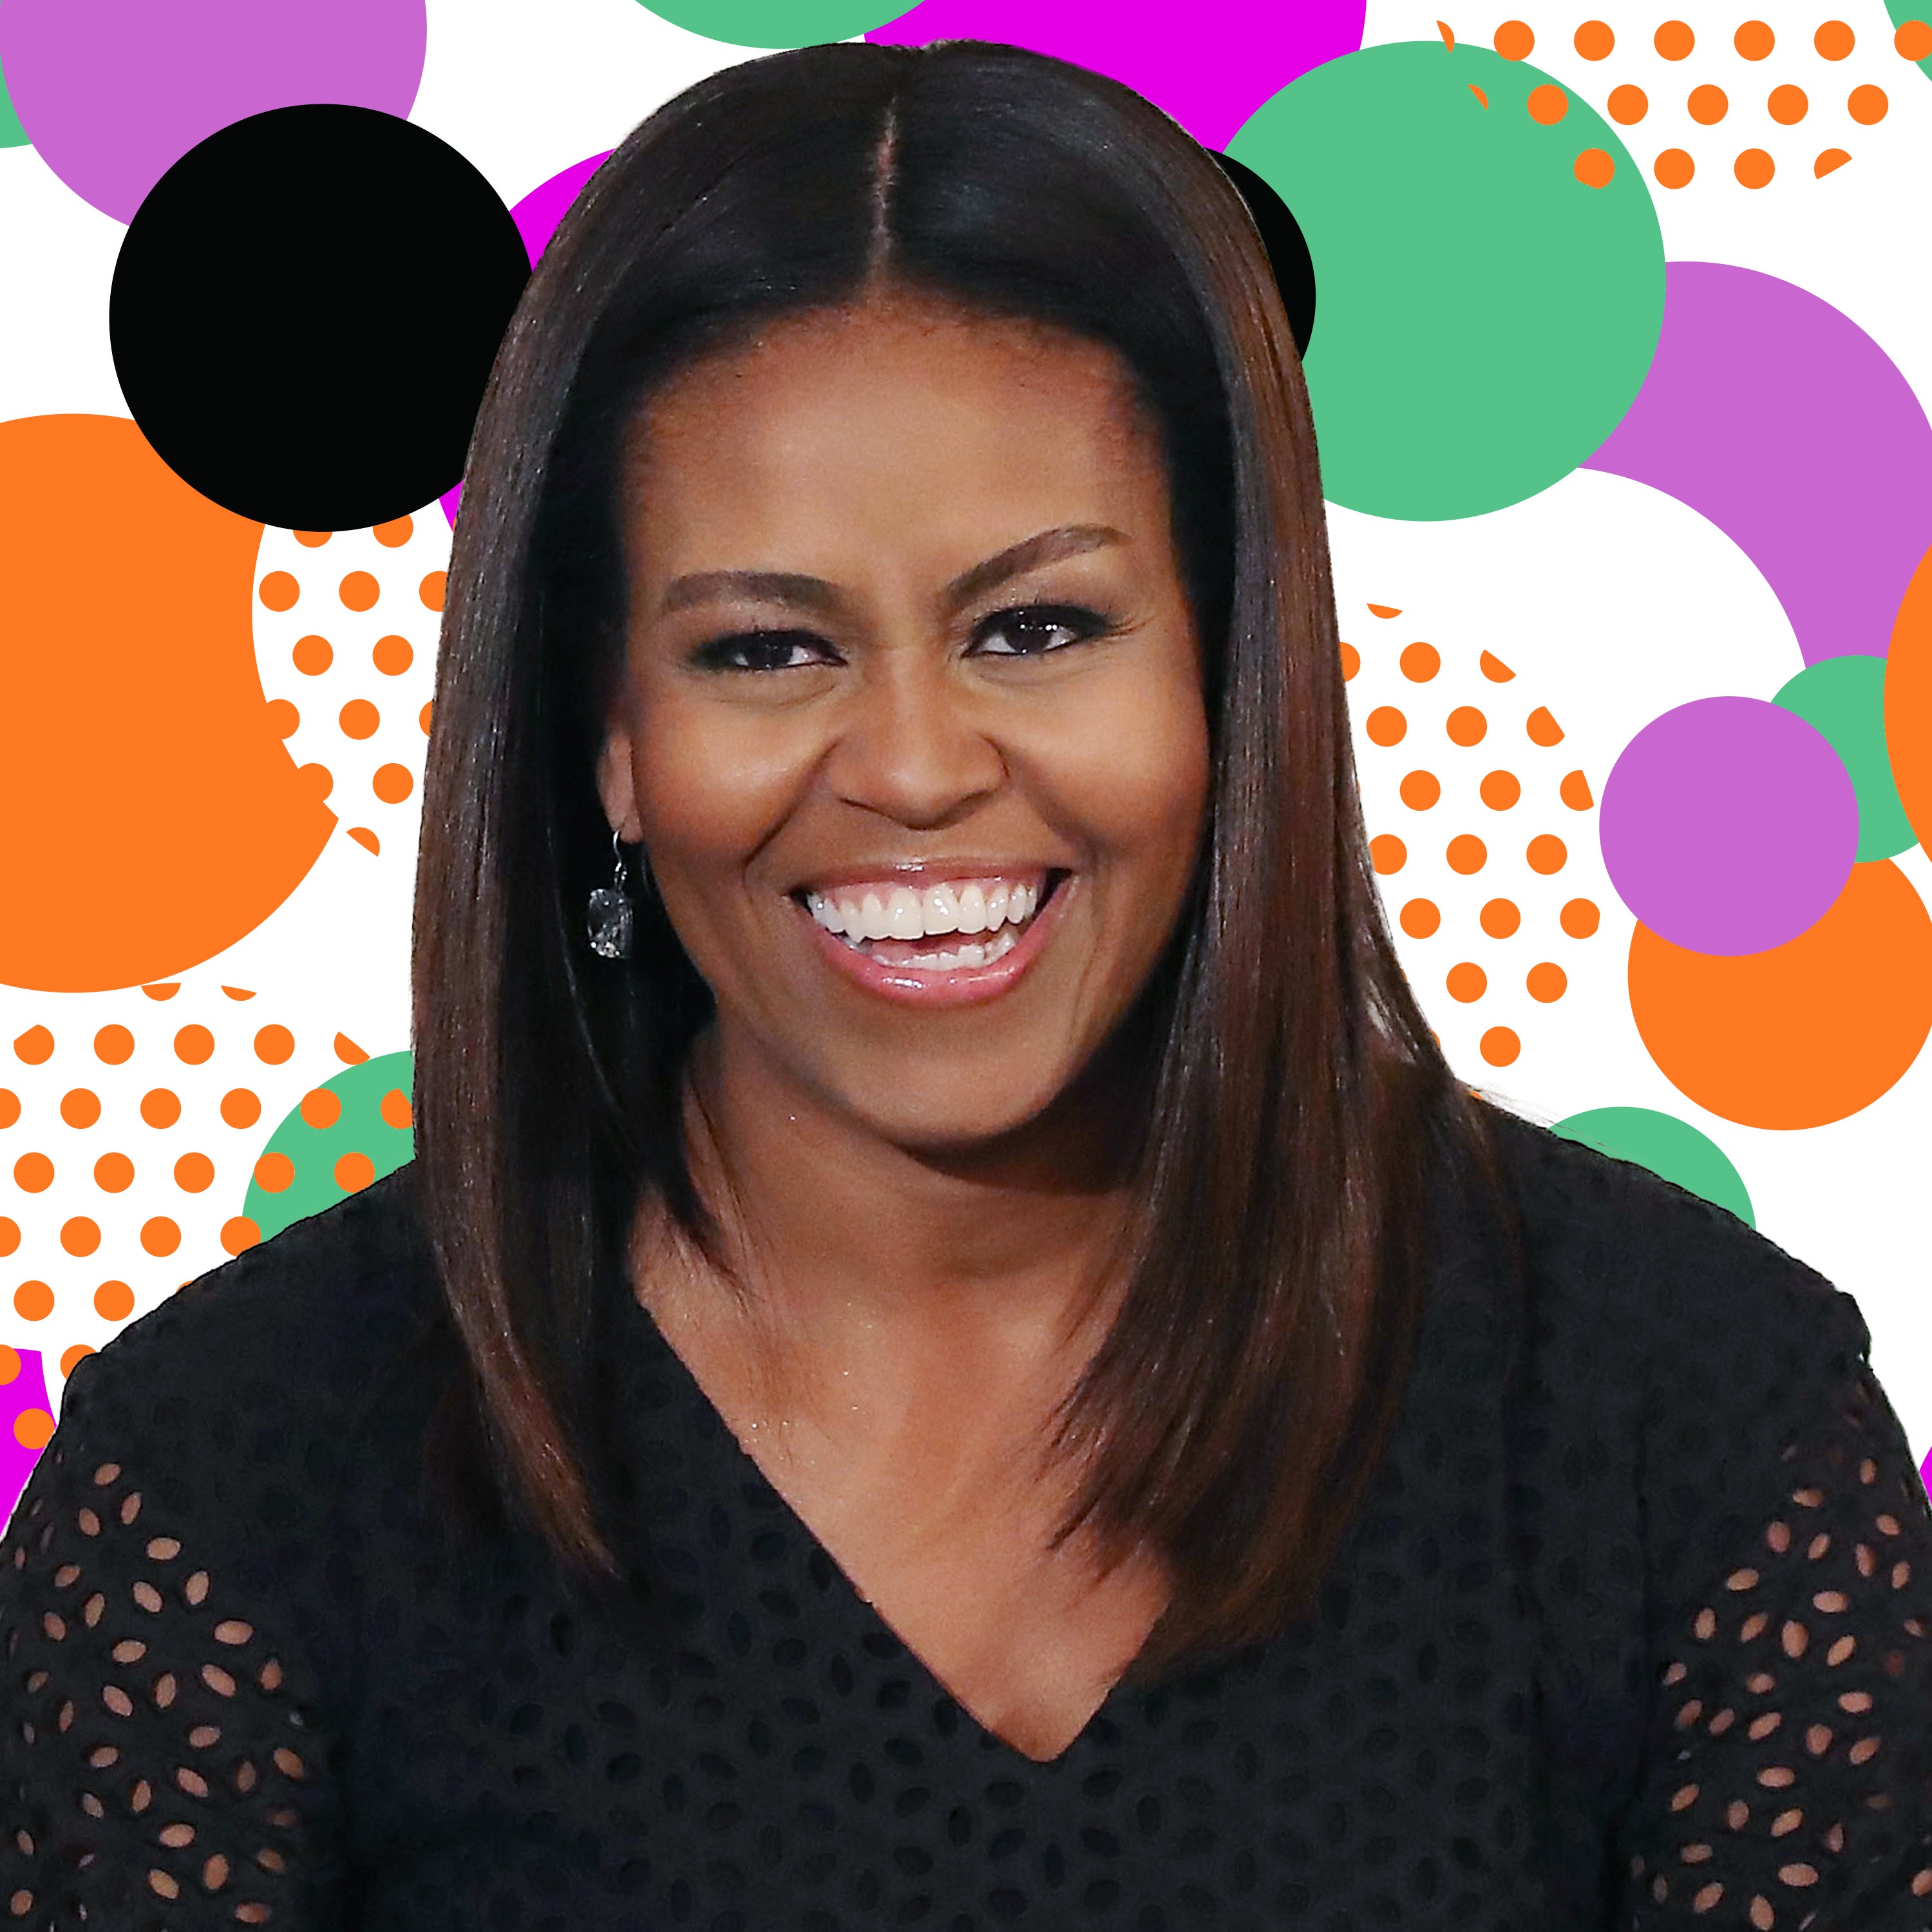 Michelle Obama Is Loving This Fierce Music Video of 'Young Queens' Rapping About Higher Education
